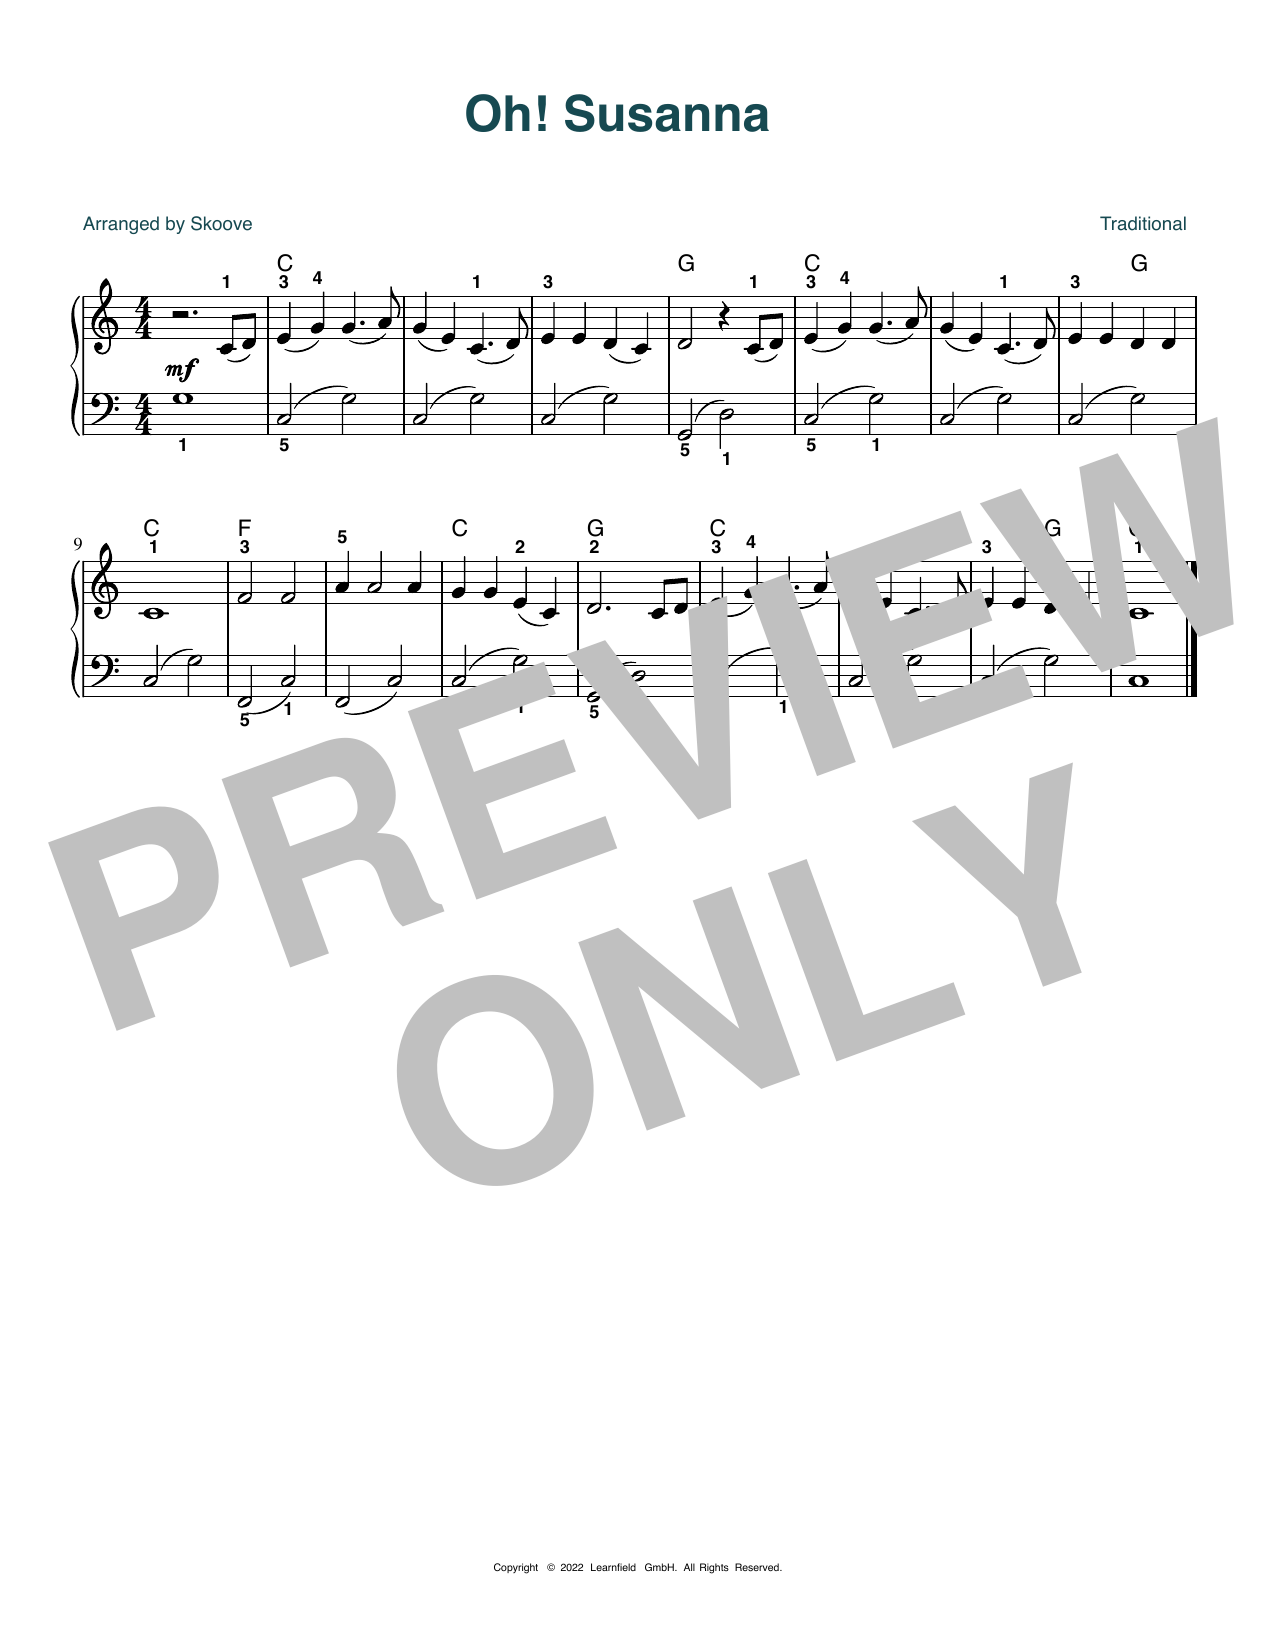 Download Traditional Oh! Susanna (arr. Skoove) Sheet Music